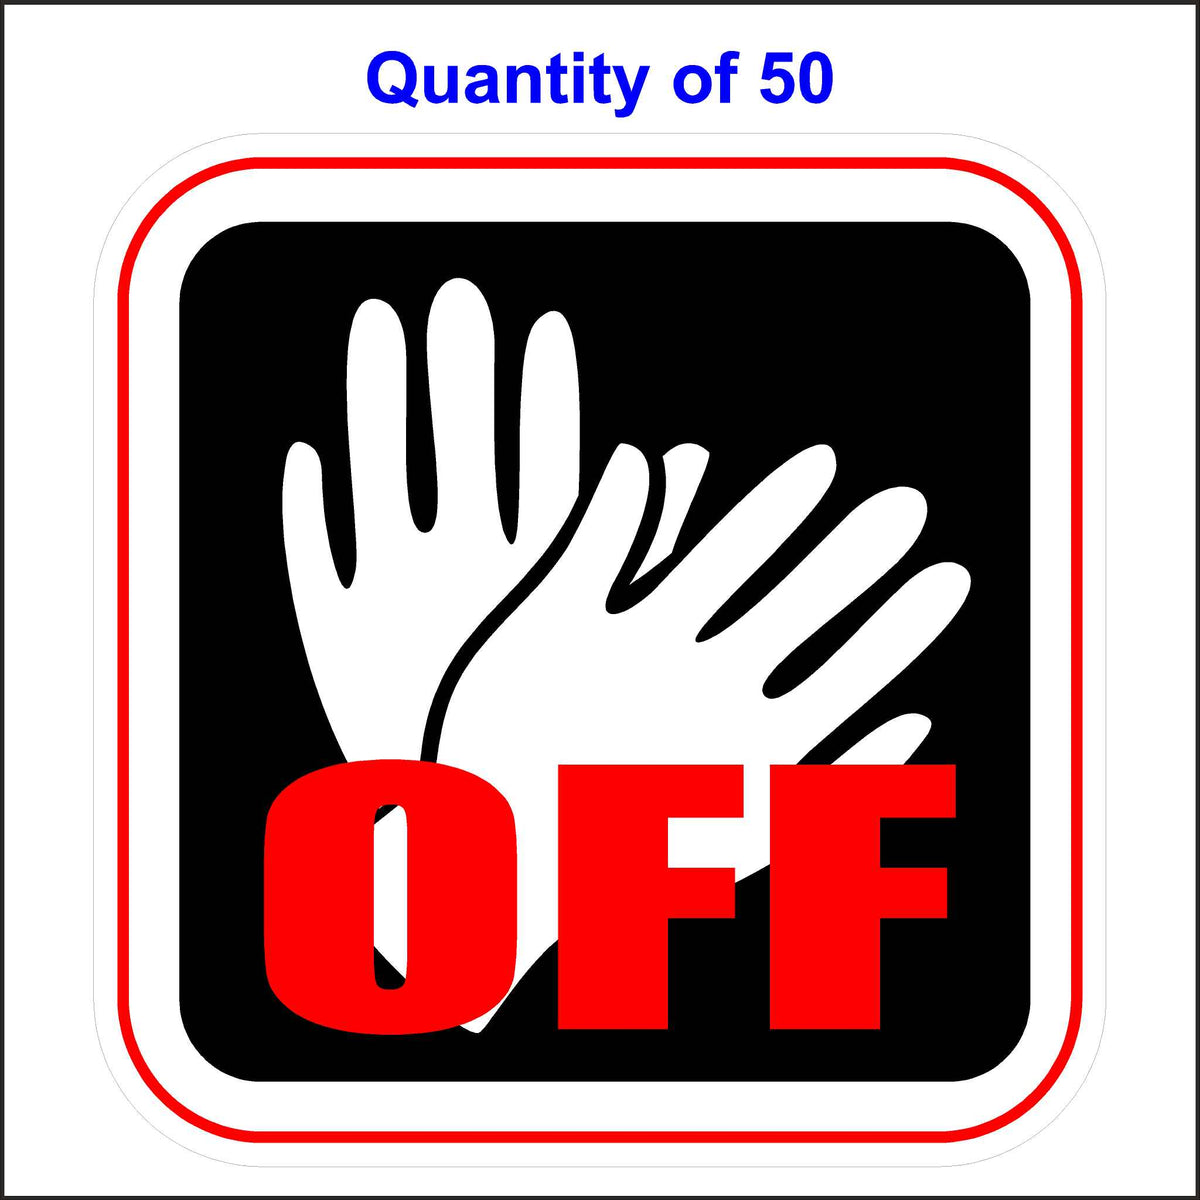 Hands off Sticker. This Sticker Has a Black Background With White Hands and the Word off Printed in Red. 50 Quantity.